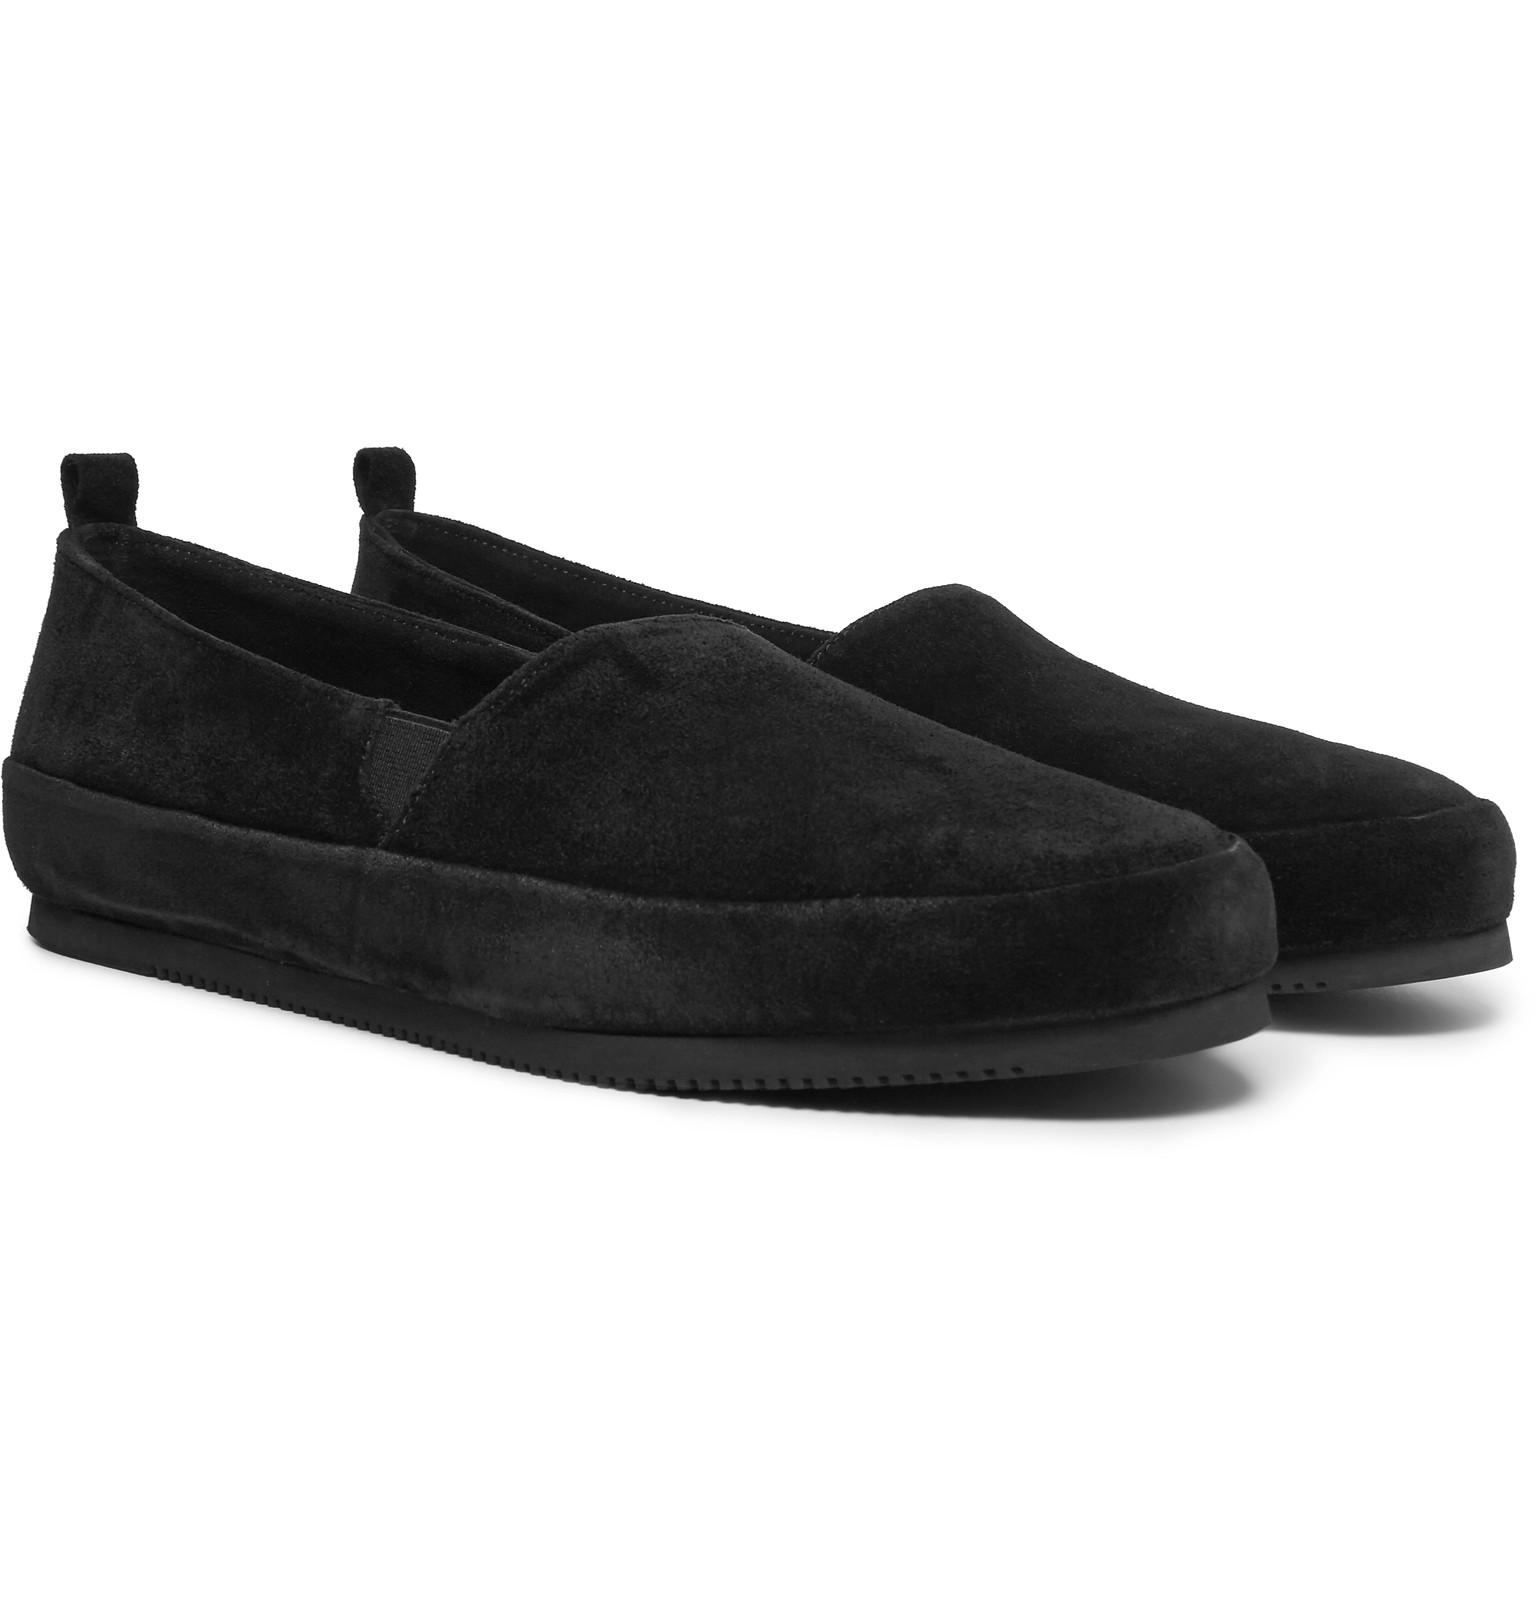 Mulo Suede Loafers in Black for Men - Lyst